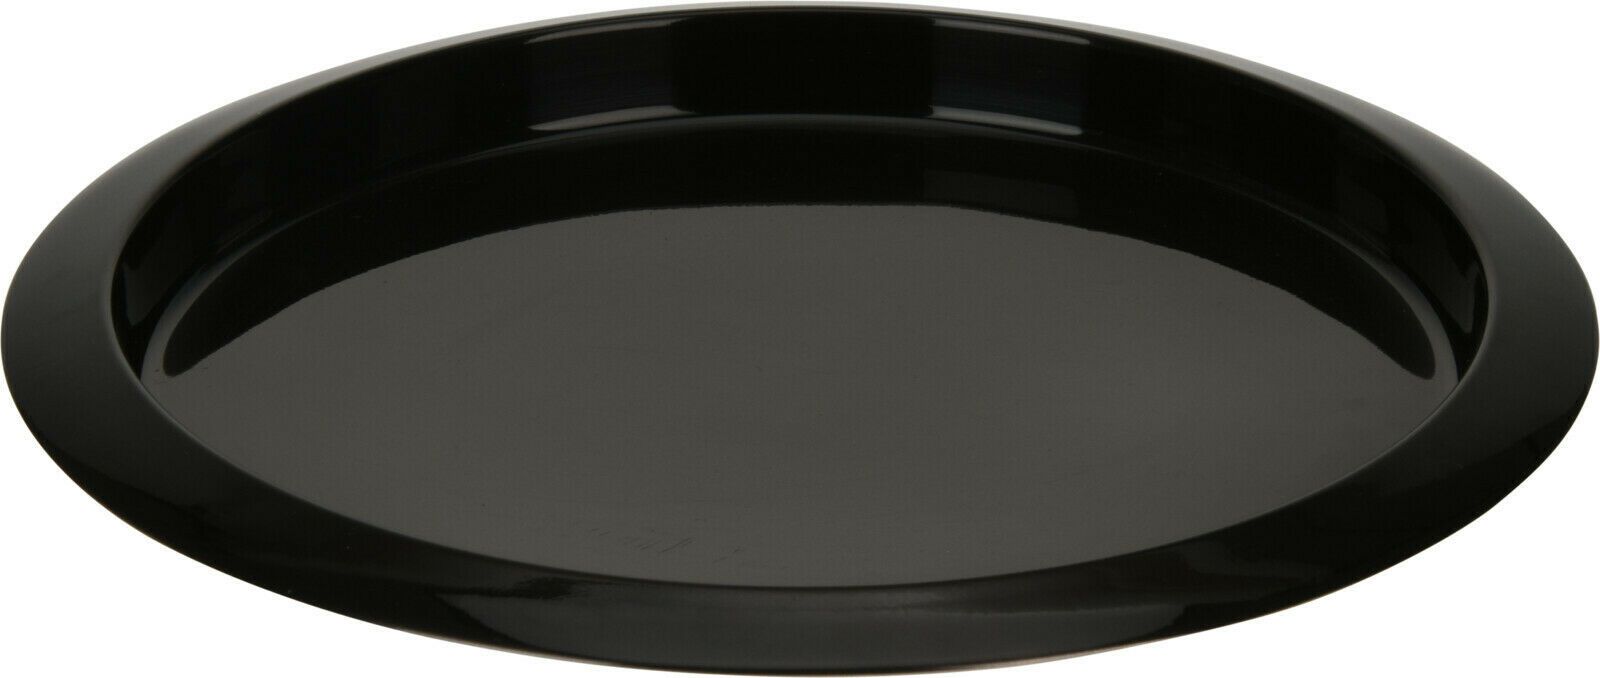 Large 35cm Round Serving Tray Stainless Steel Black Serving Tray